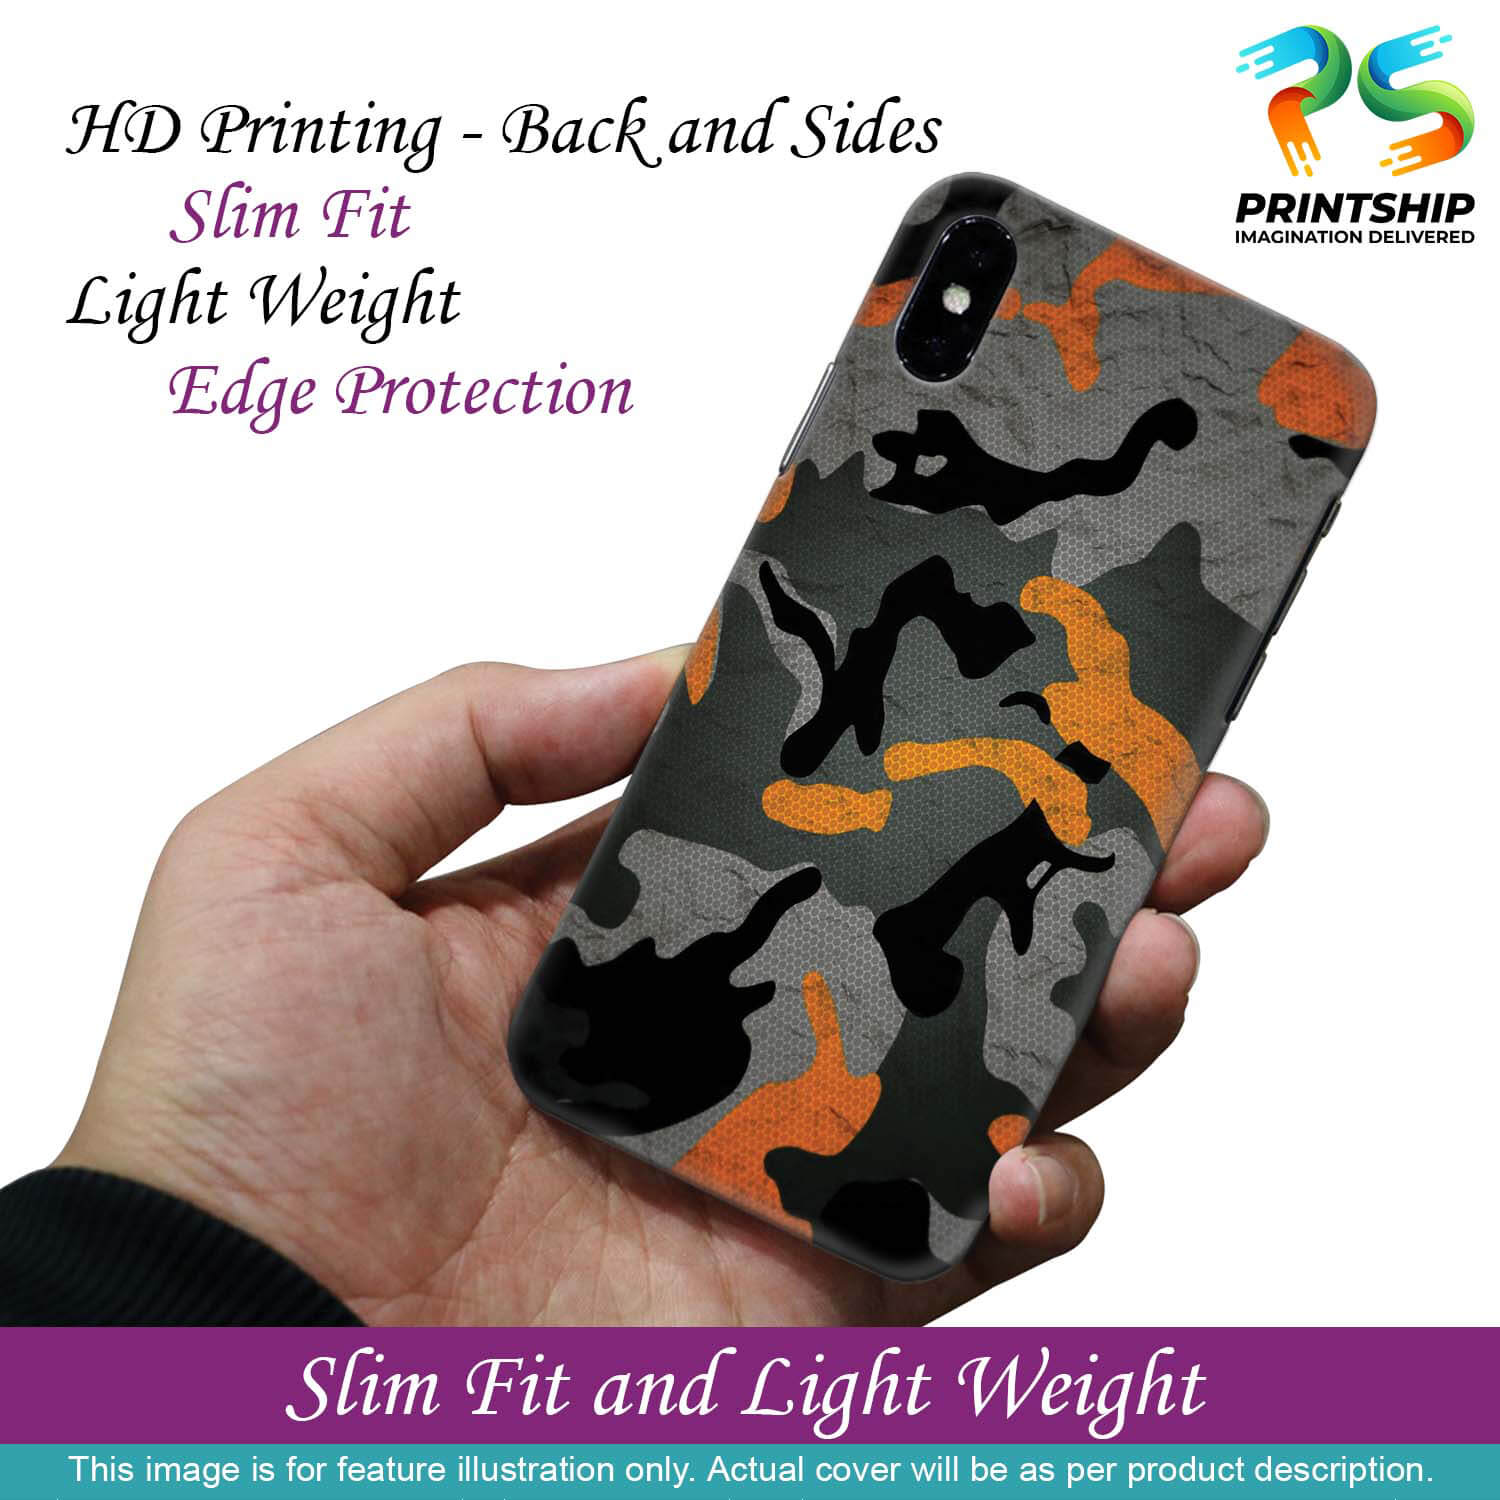 PS1337-Premium Looking Camouflage Back Cover for Samsung Galaxy J7 Max